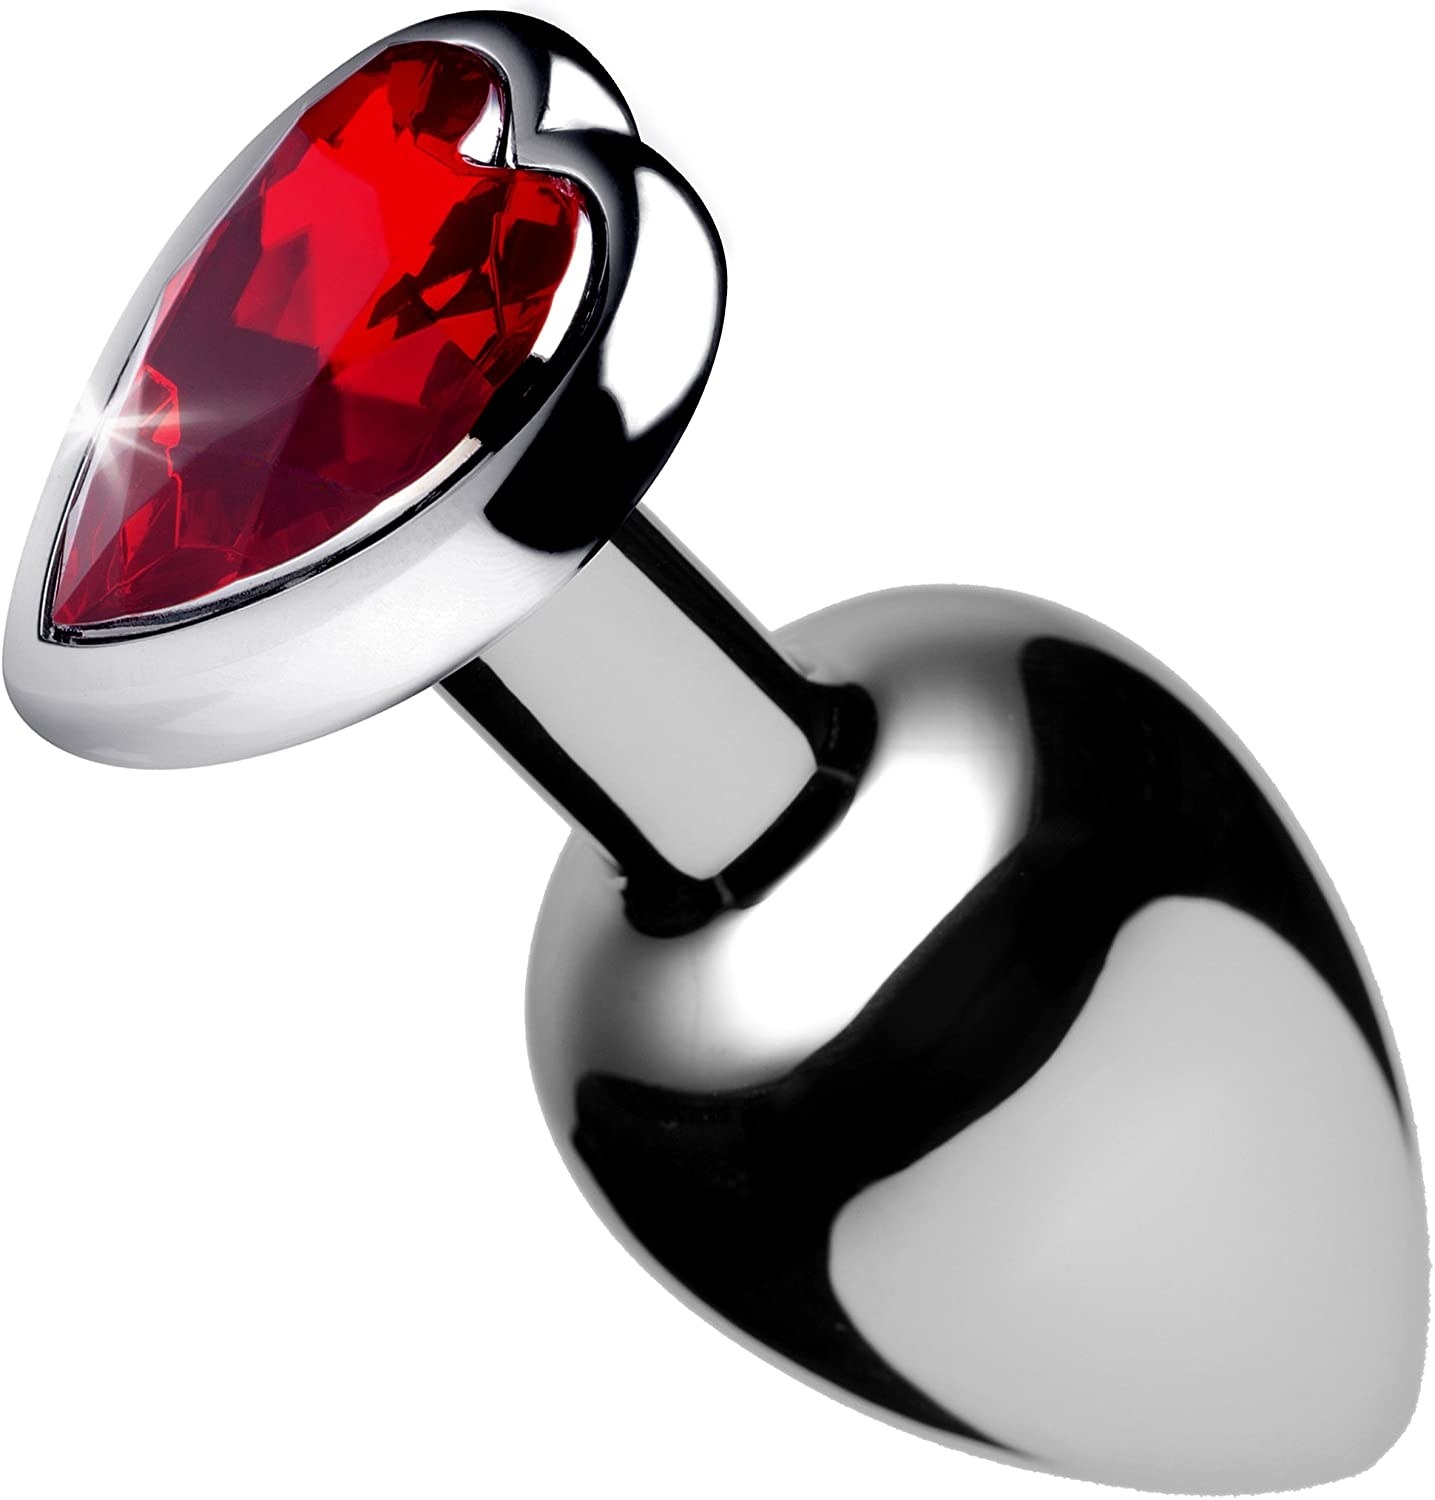 The silver butt plug with red stone detail